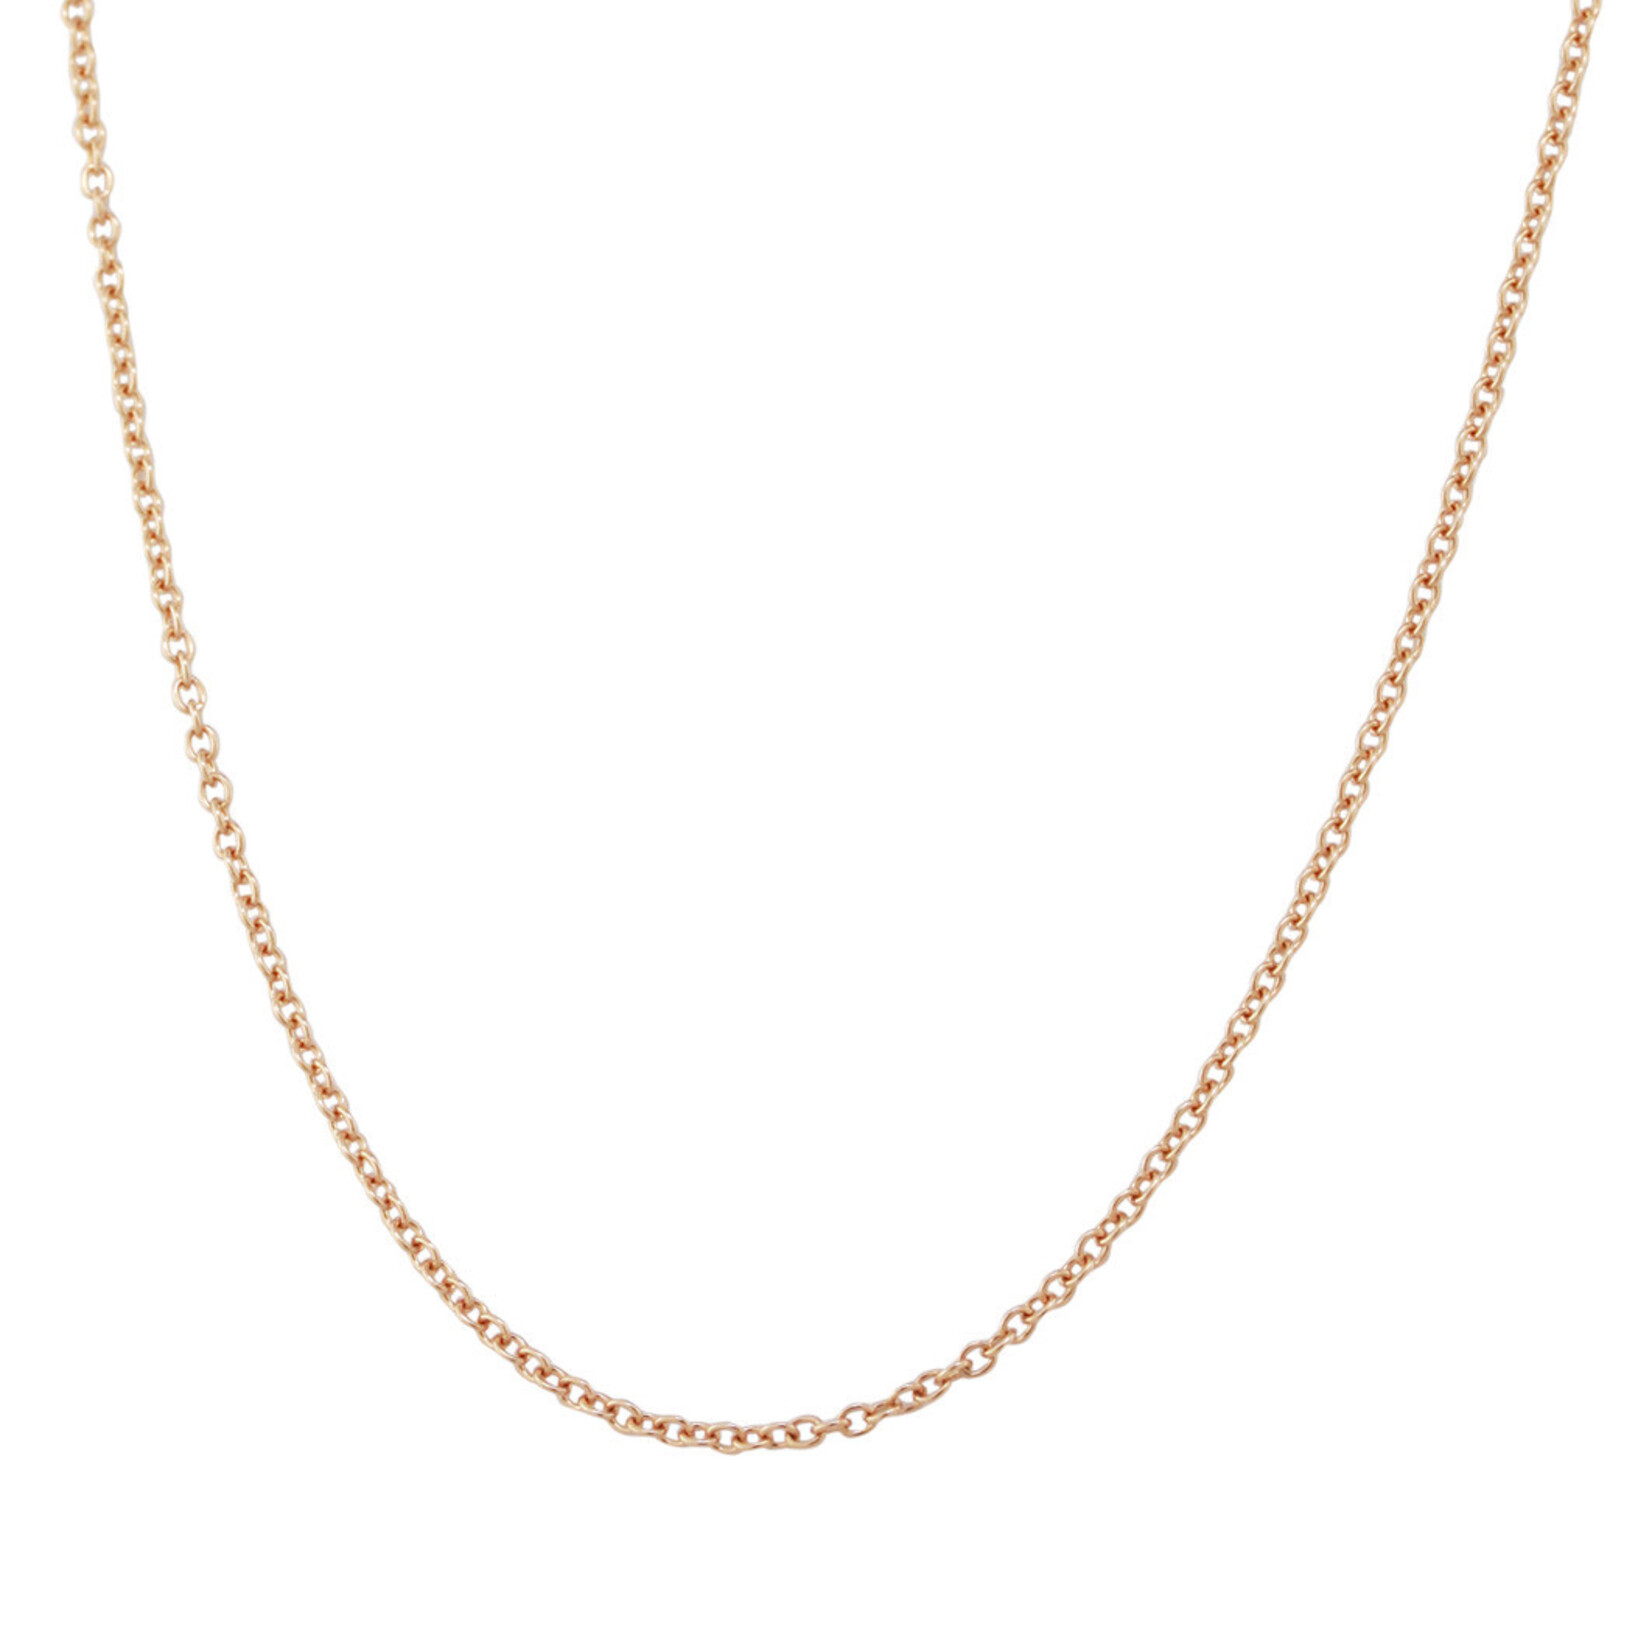 Heather Moore 14K Rose Gold 1.5mm Chain, 18"